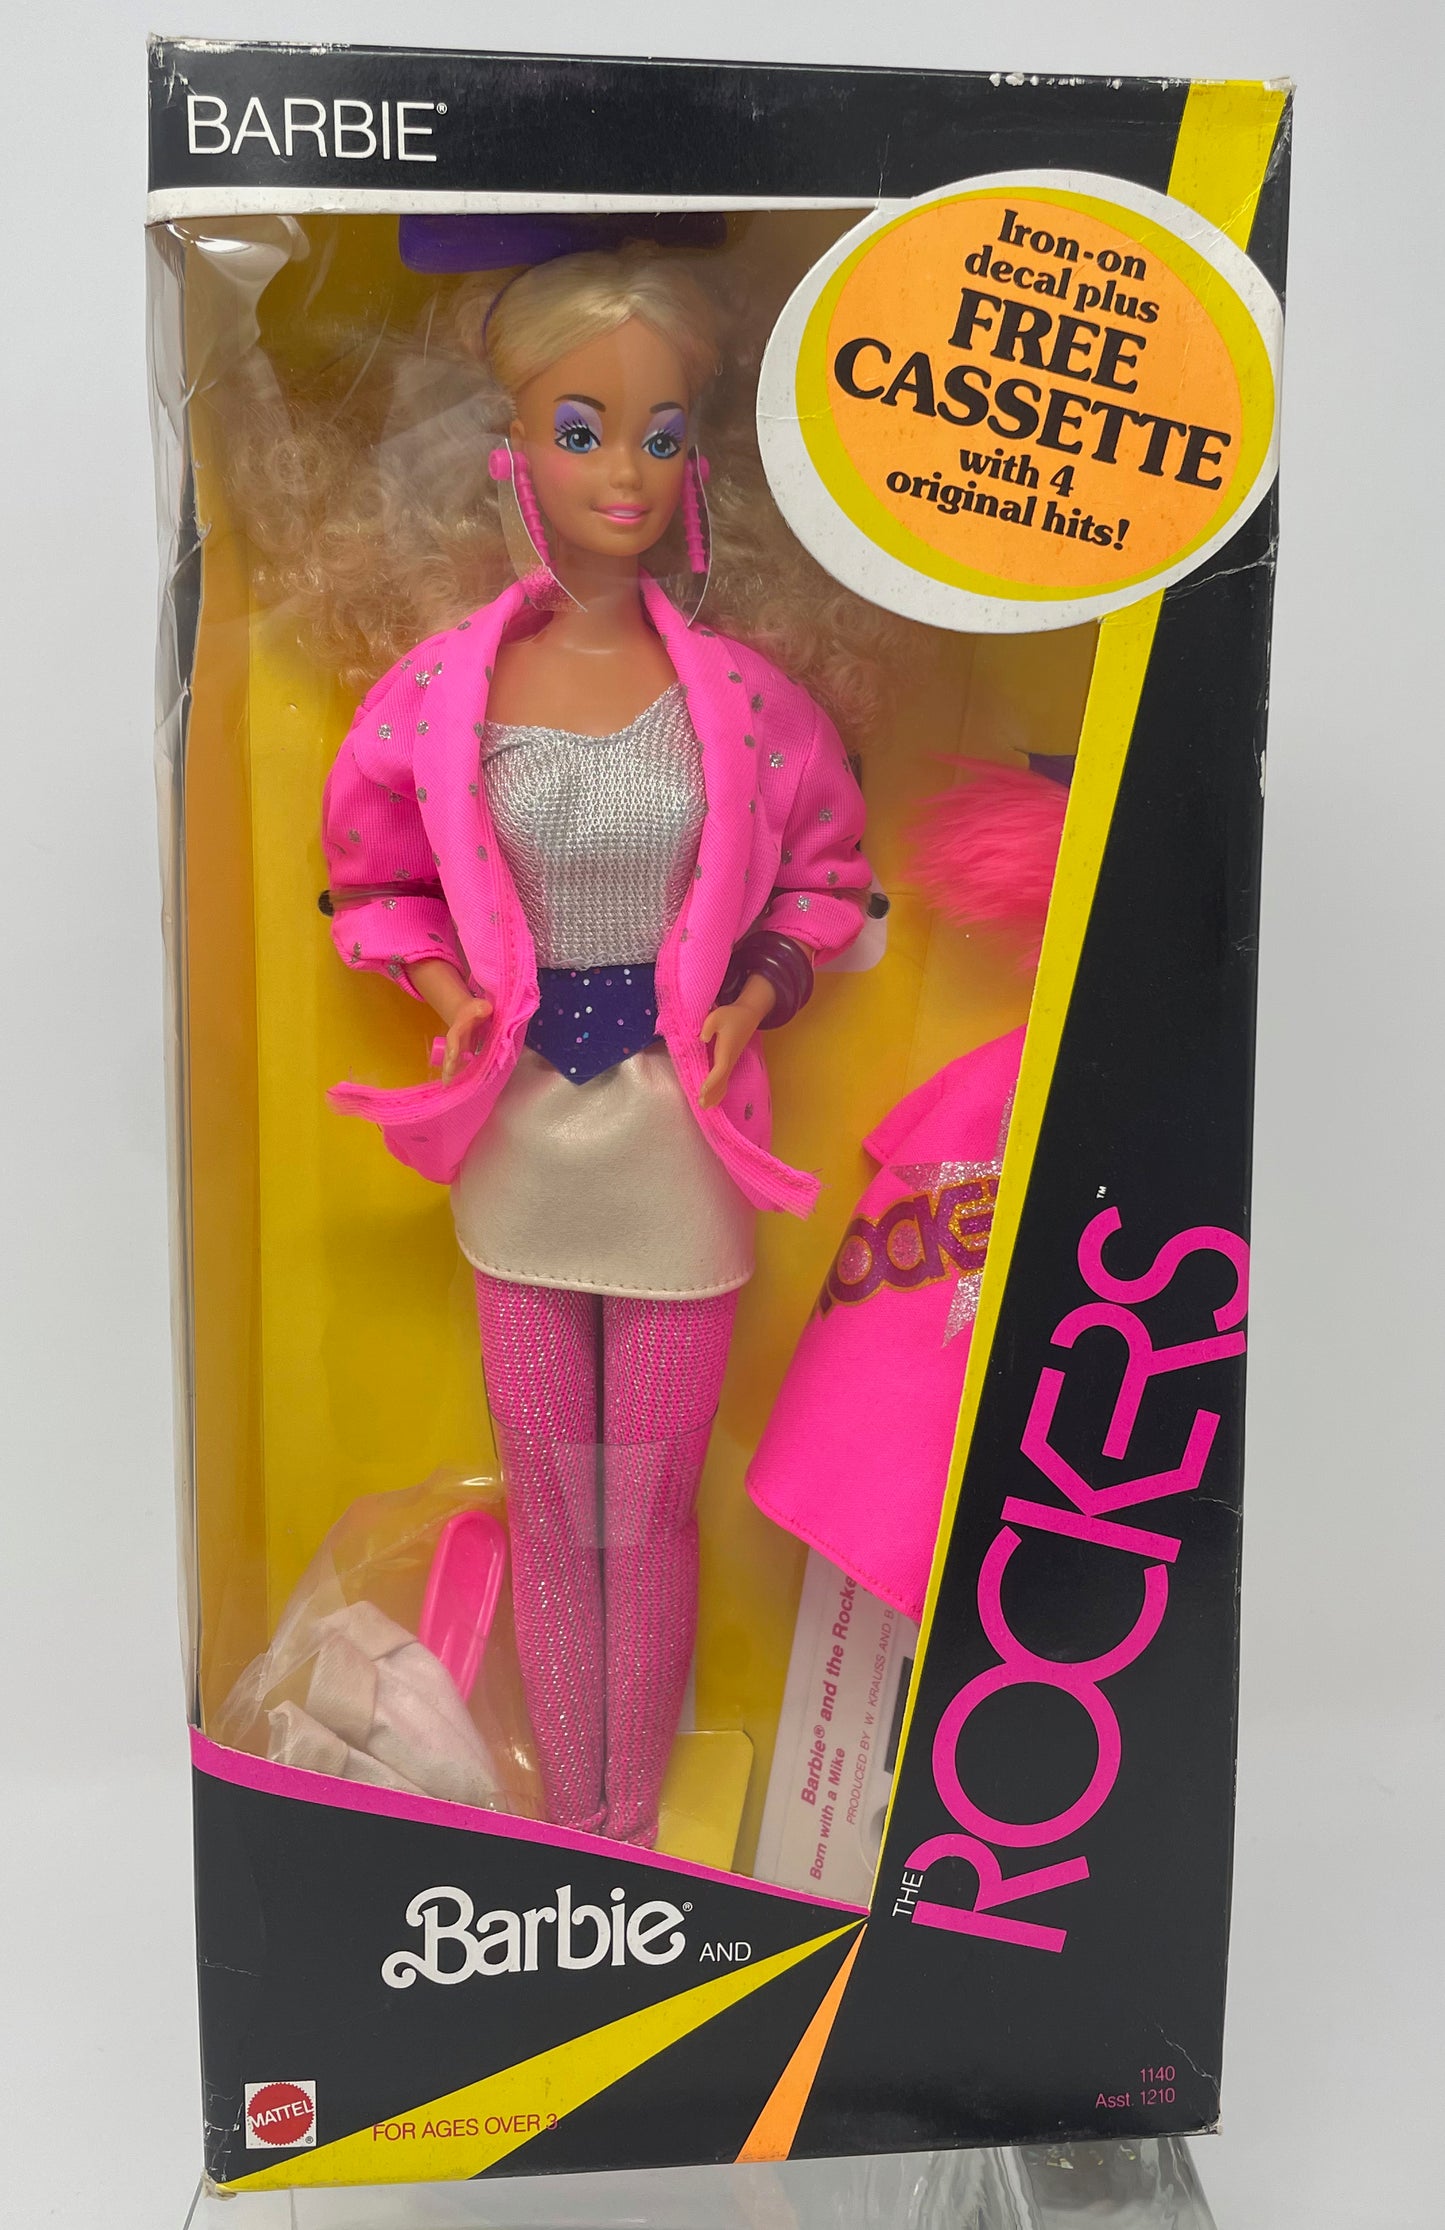 BARBIE AND THE ROCKERS - BARBIE #1140 - MATTEL 1985 (2 OF 3)